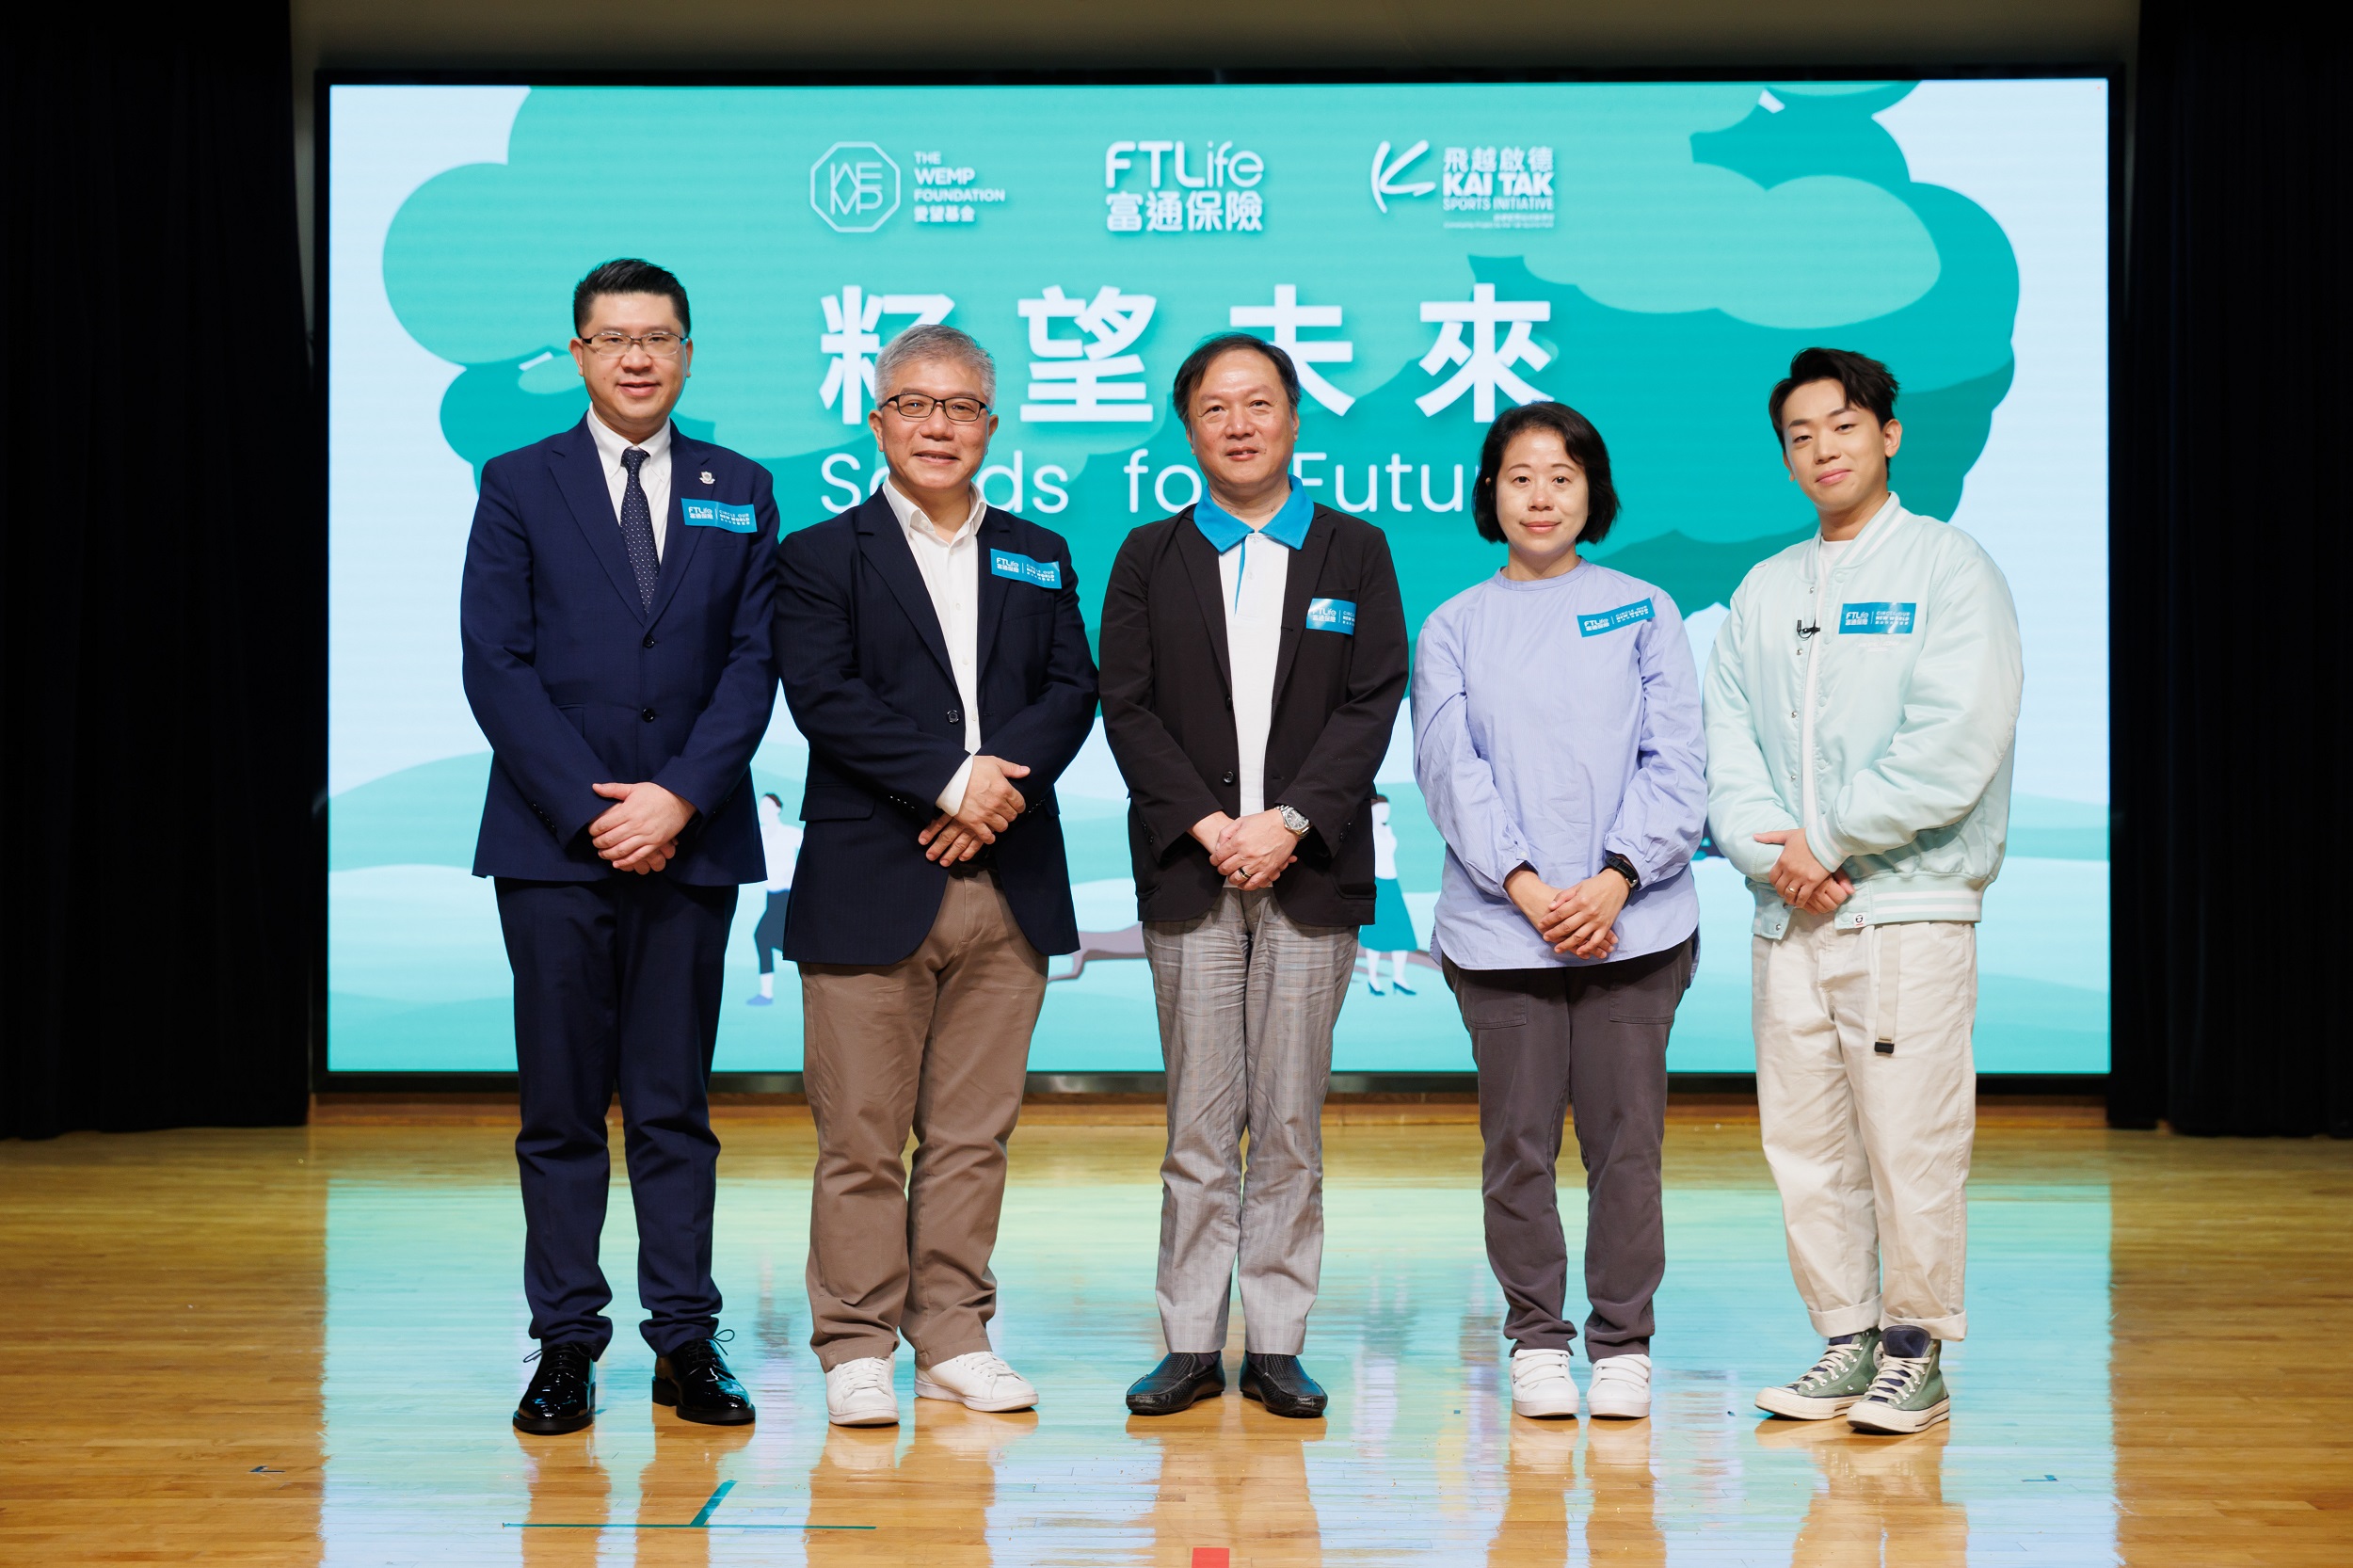 FTLife launches “Seeds for Future” to promote children’s holistic physical and mental development